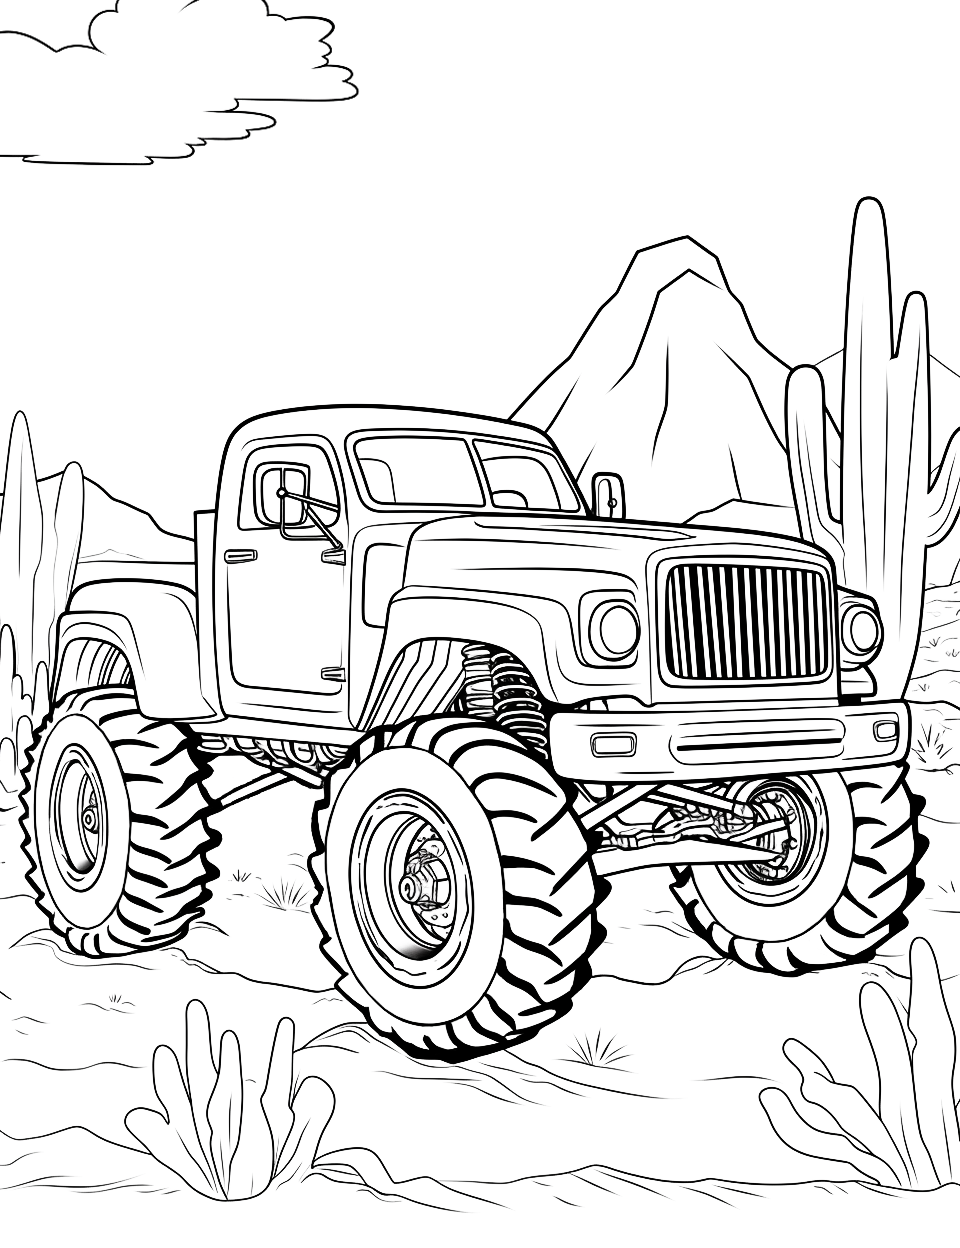 Desert Dash Monster Truck Coloring Page - A monster truck racing through a desert with cacti and sand dunes.